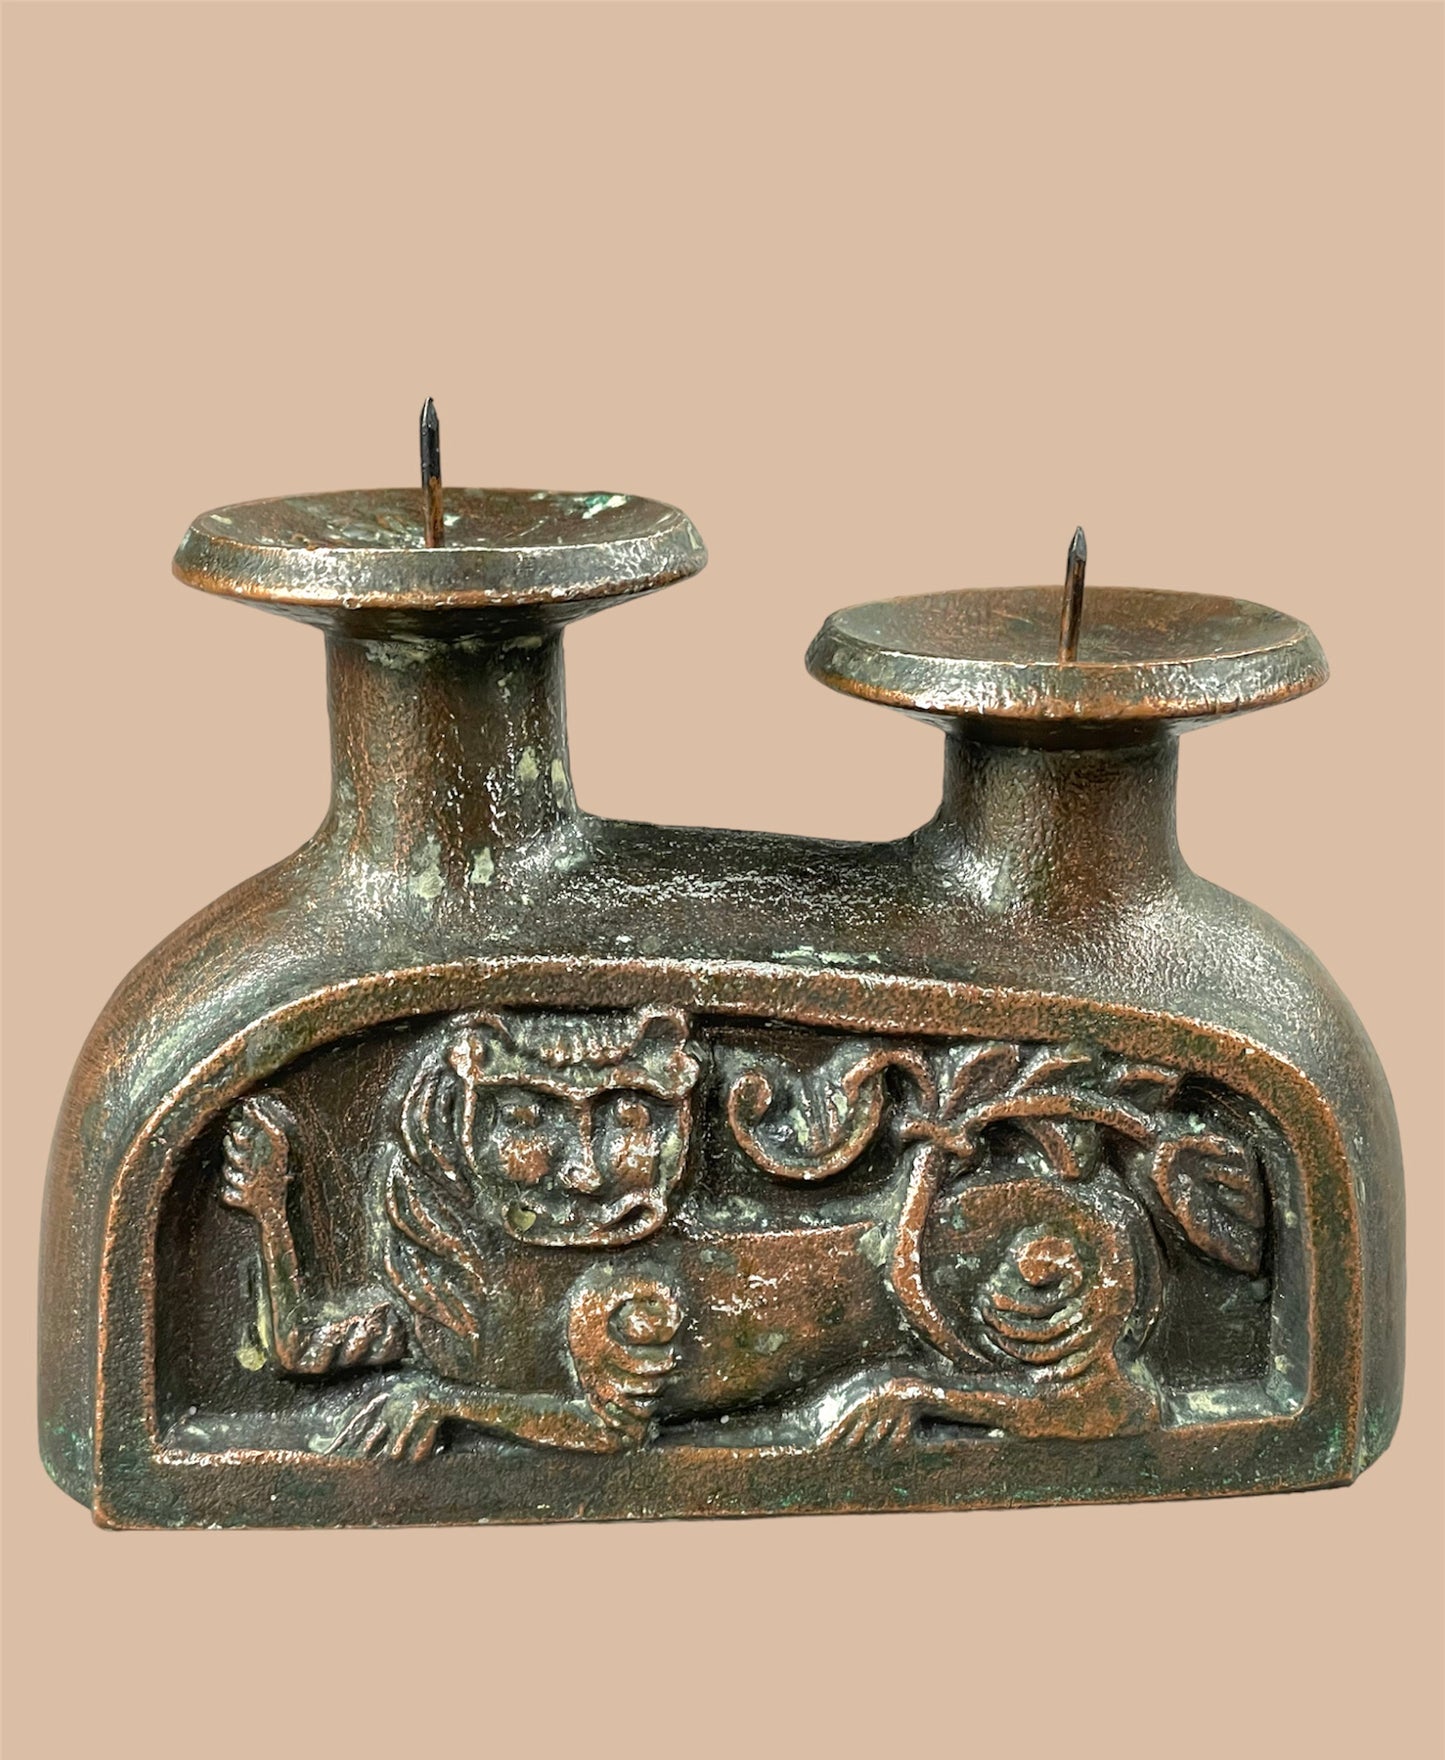 Sleeping and Watchful Lion Double Candleholder